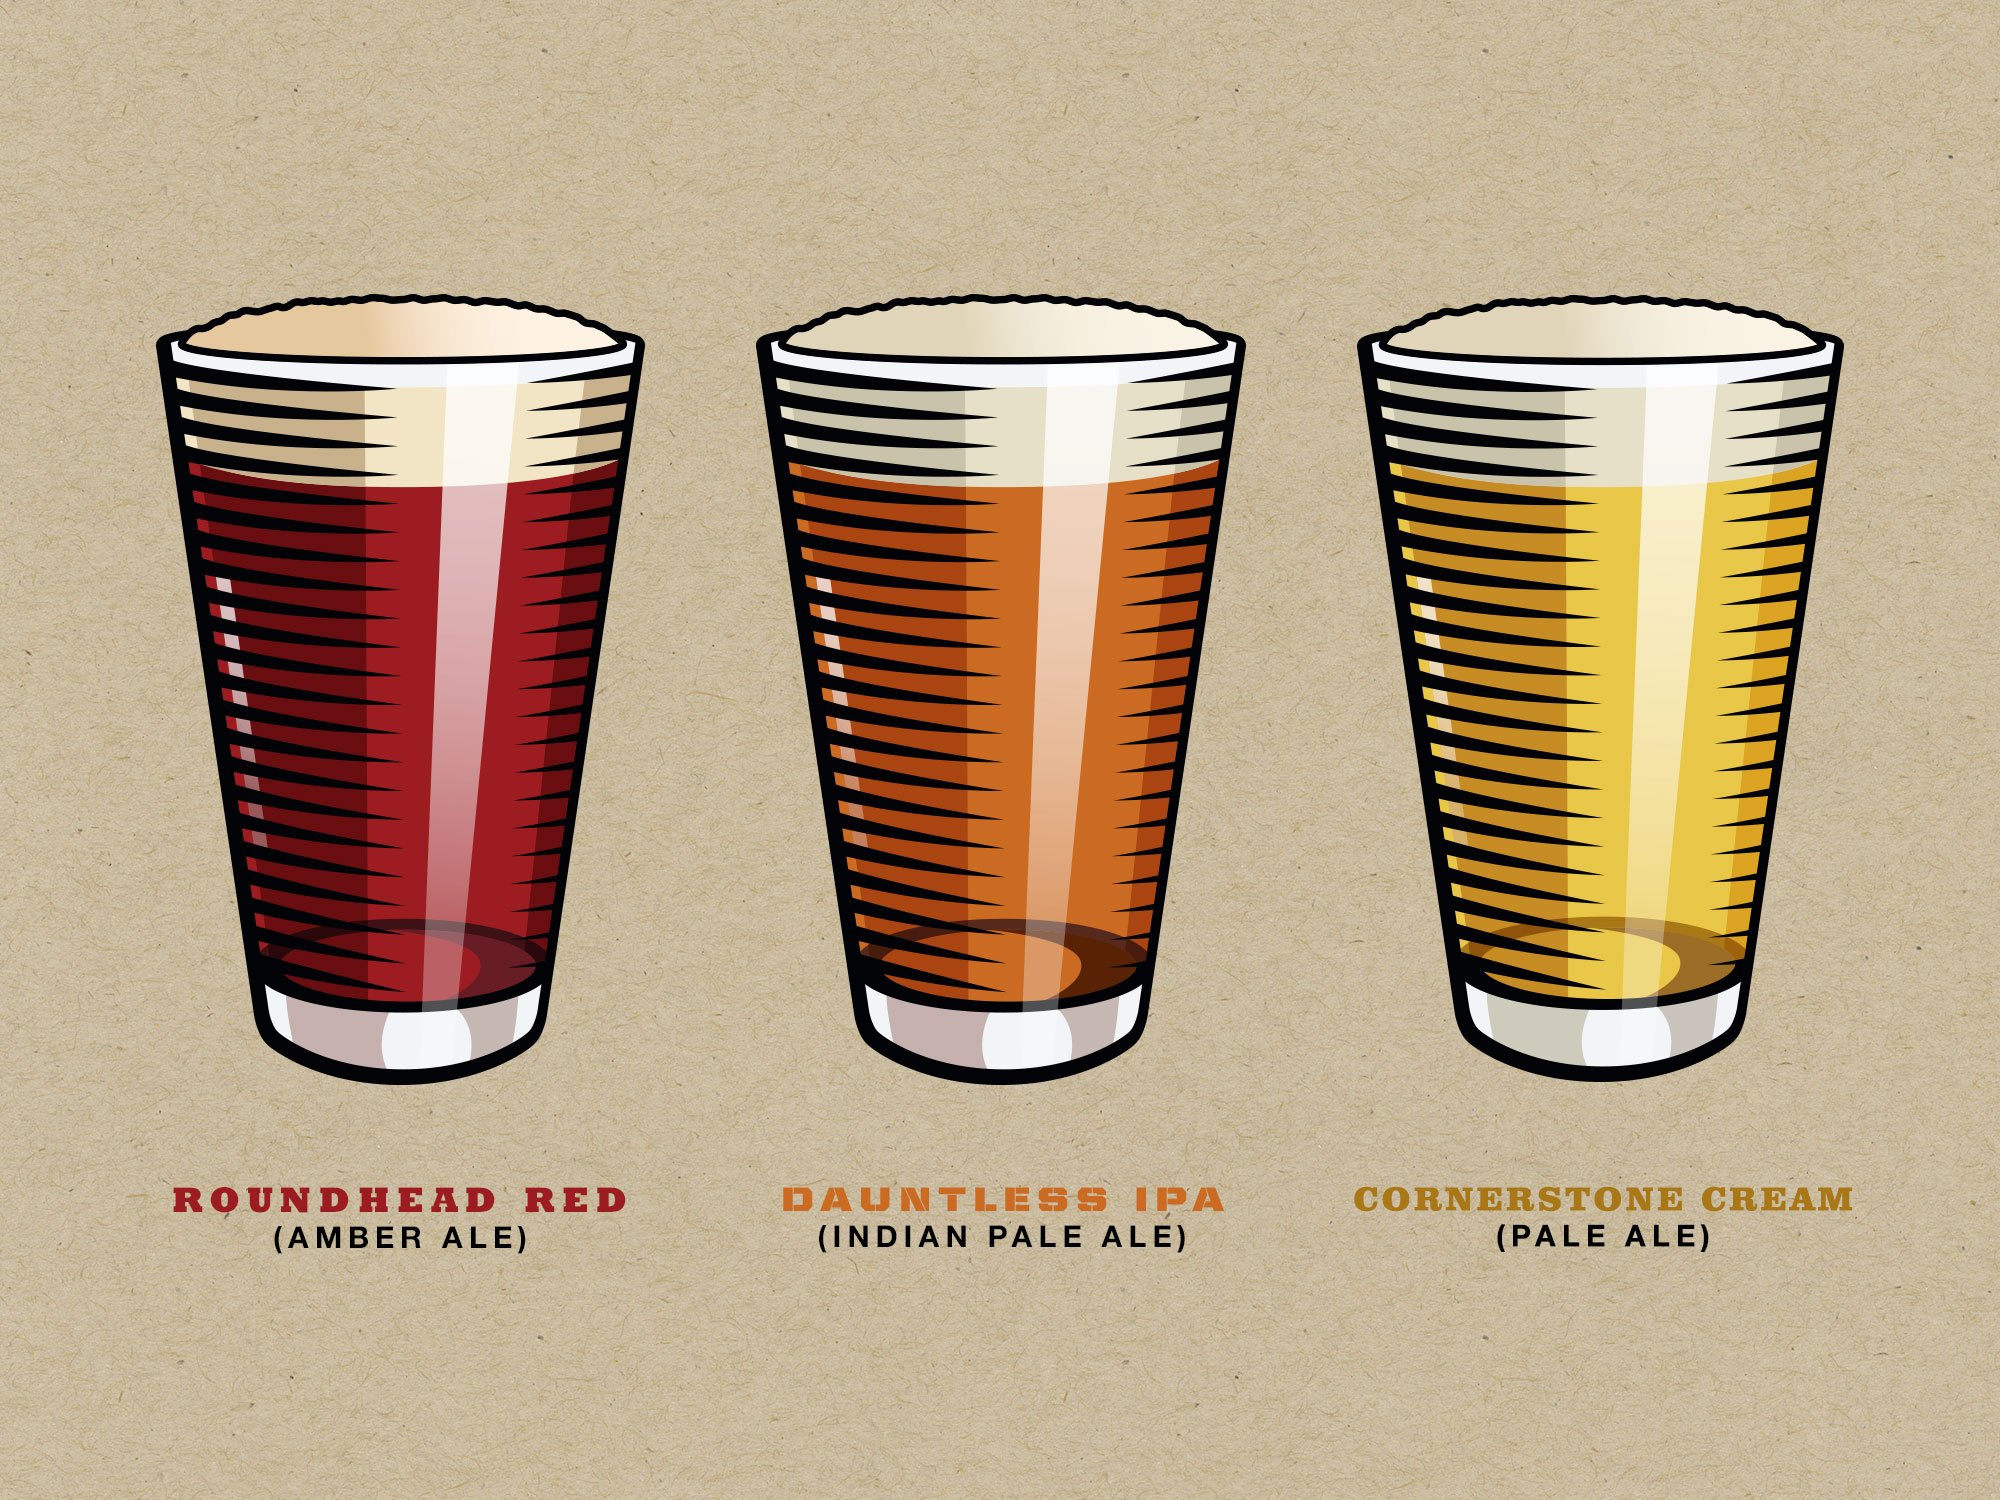 Three illustrations of beer glasses for Solid Rock Brewing's sixpack cartons and labels